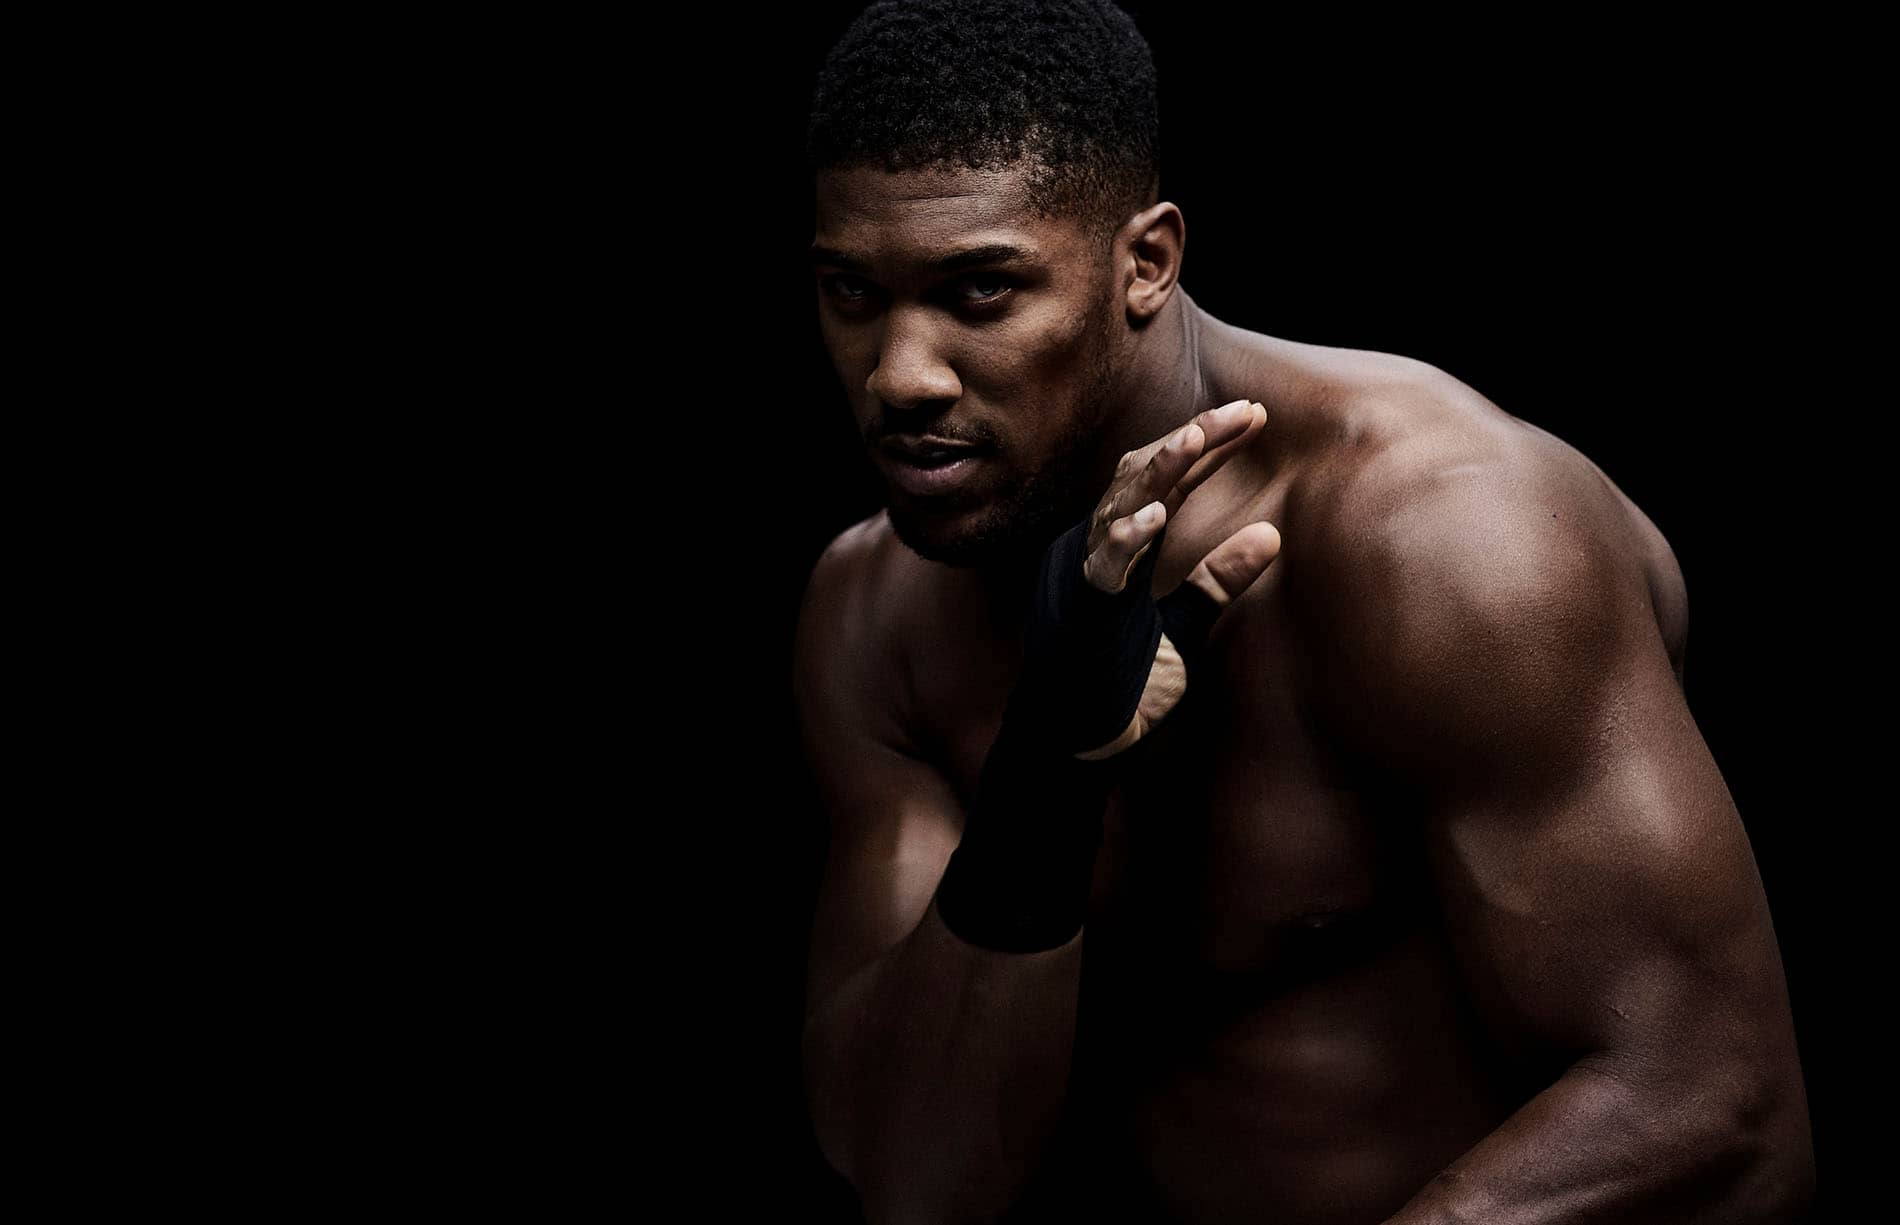 Boxer Anthony Joshua photographed on a black background in a sparing pose